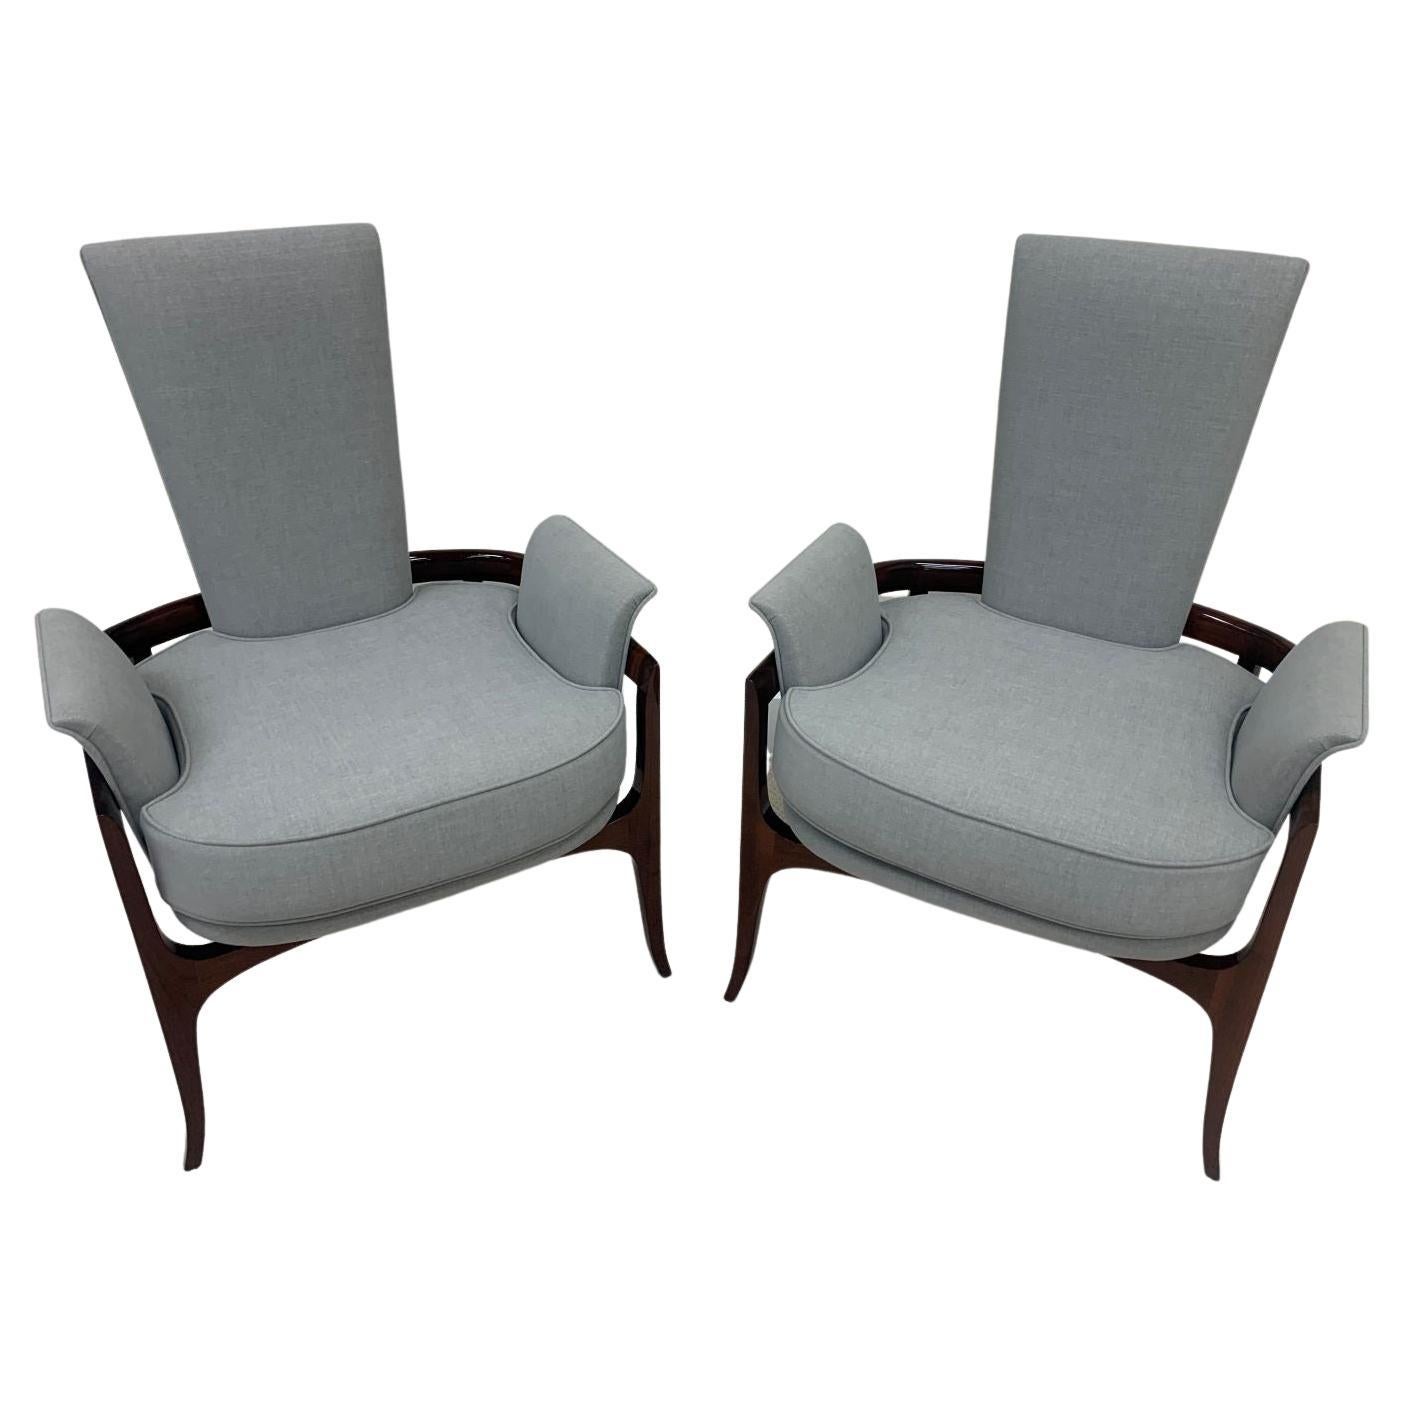 American Mid-Century Modern Sculptural Pair of Walnut Chairs in the Style of James Mont